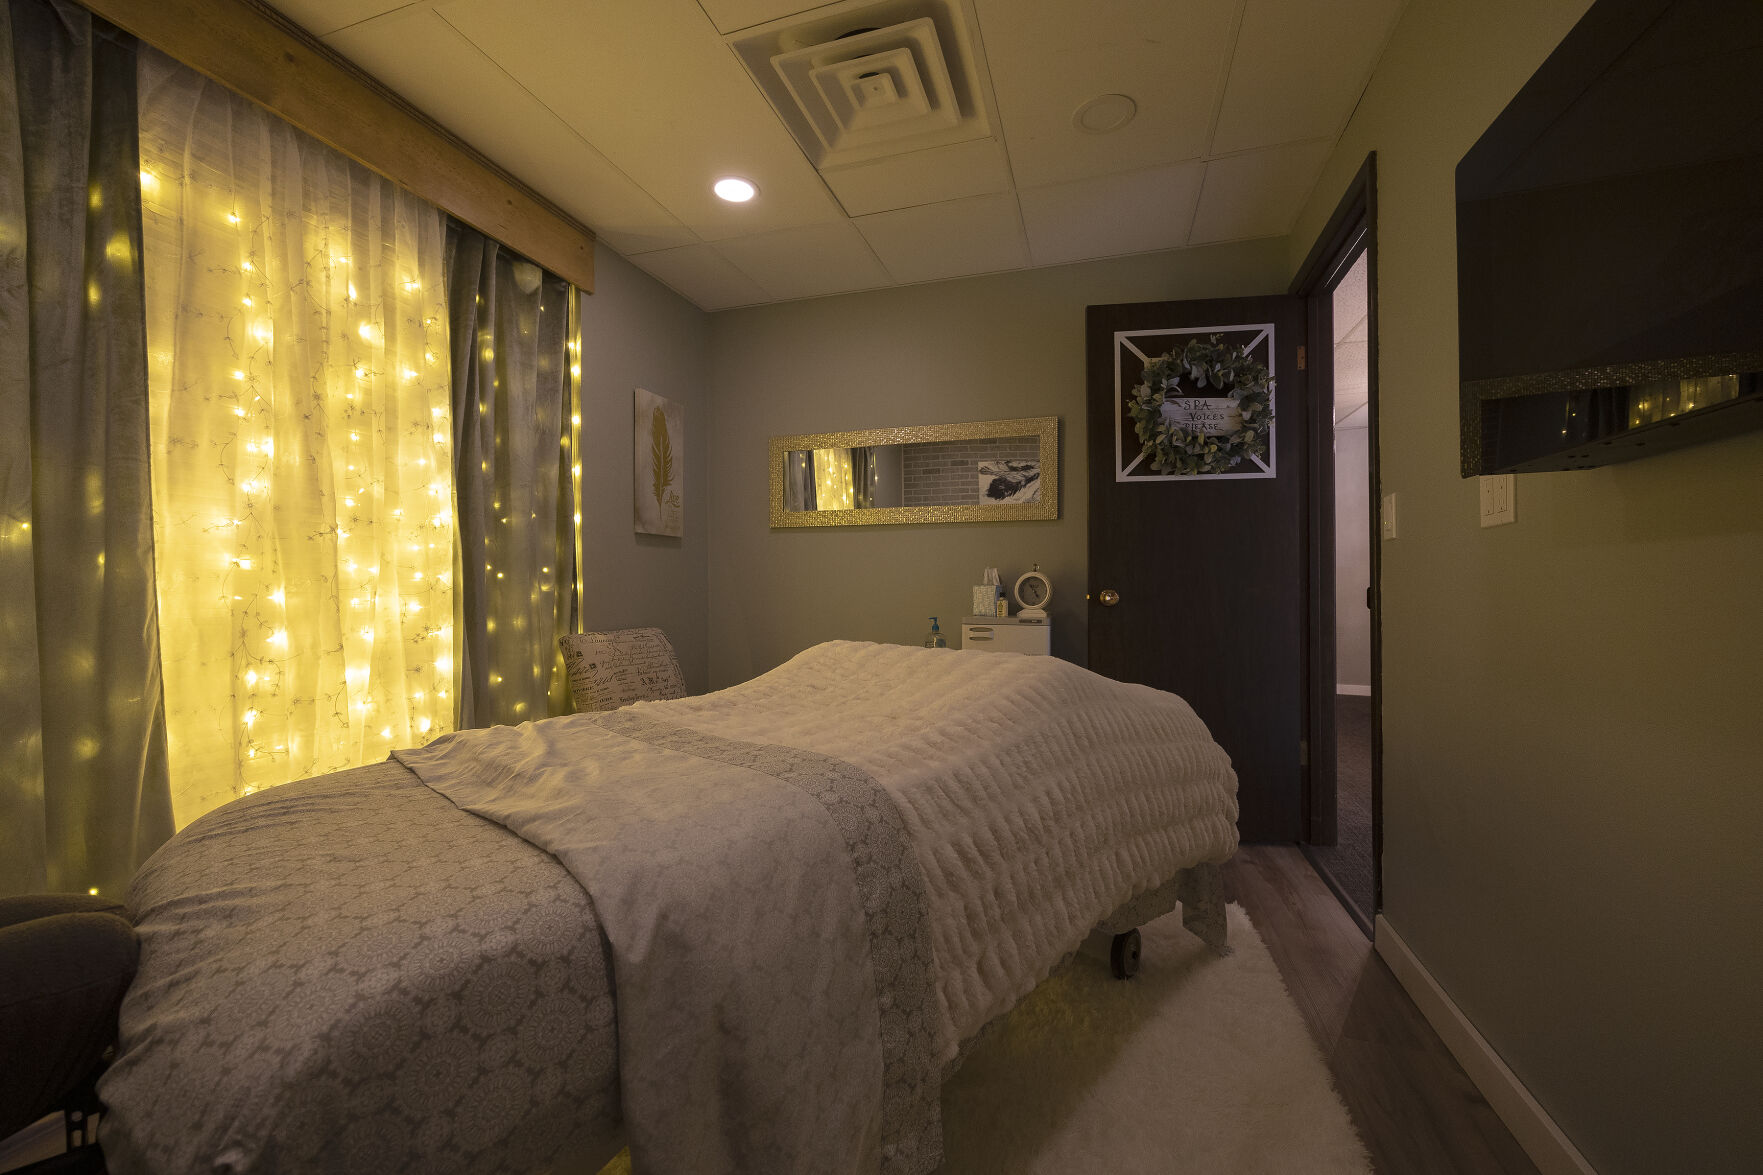 A massage therapy room at White Sage Day Spa in Dubuque.    PHOTO CREDIT: Stephen Gassman